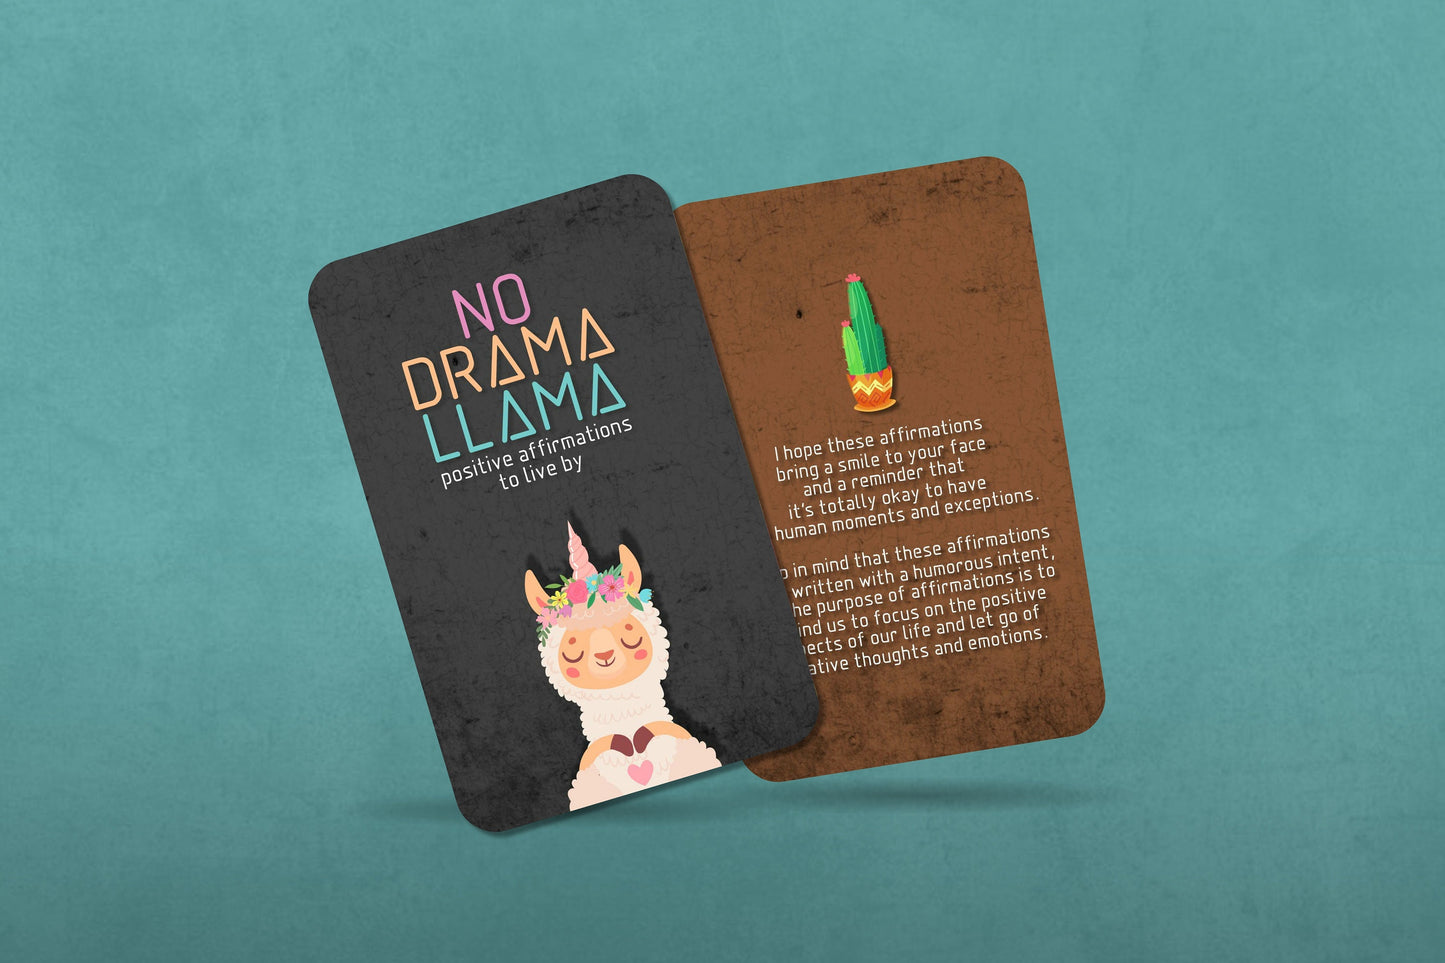 No Drama Llama - Positive affirmations to live by